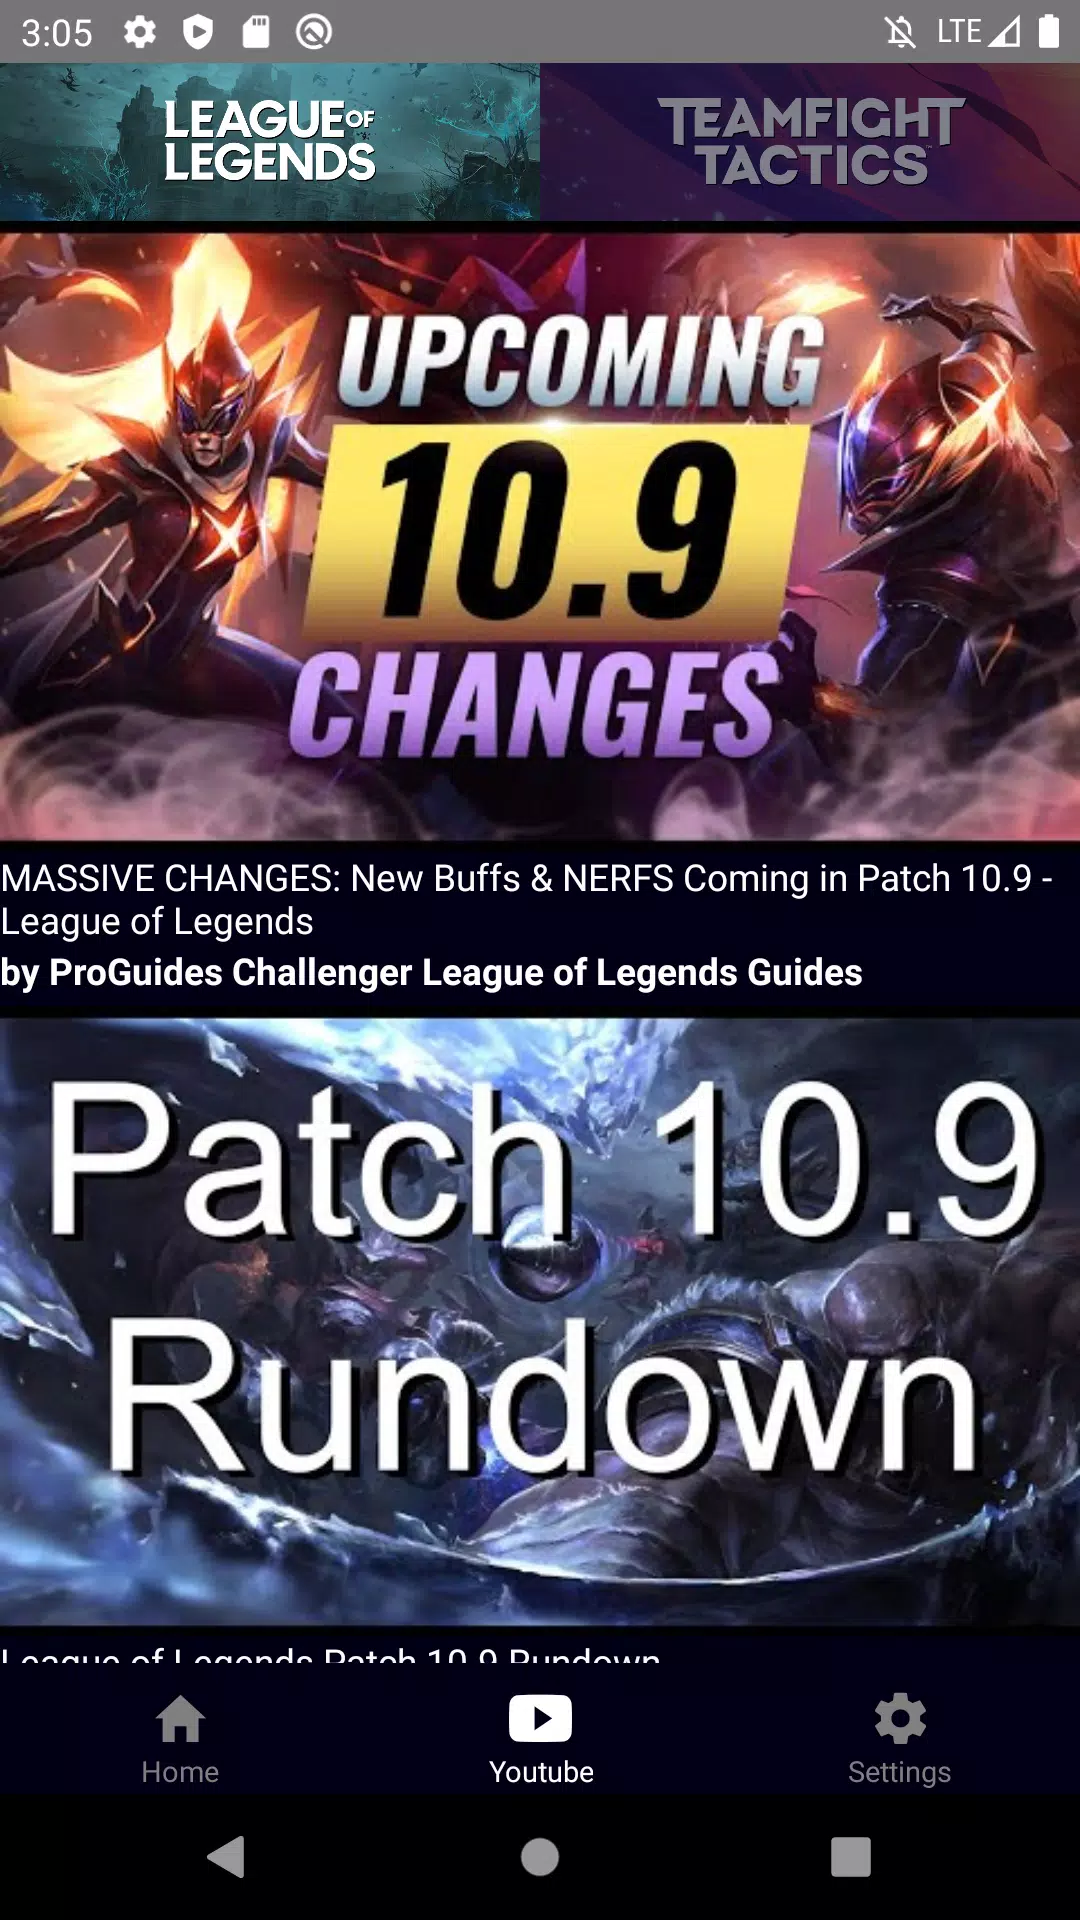 Patch 10.9 notes